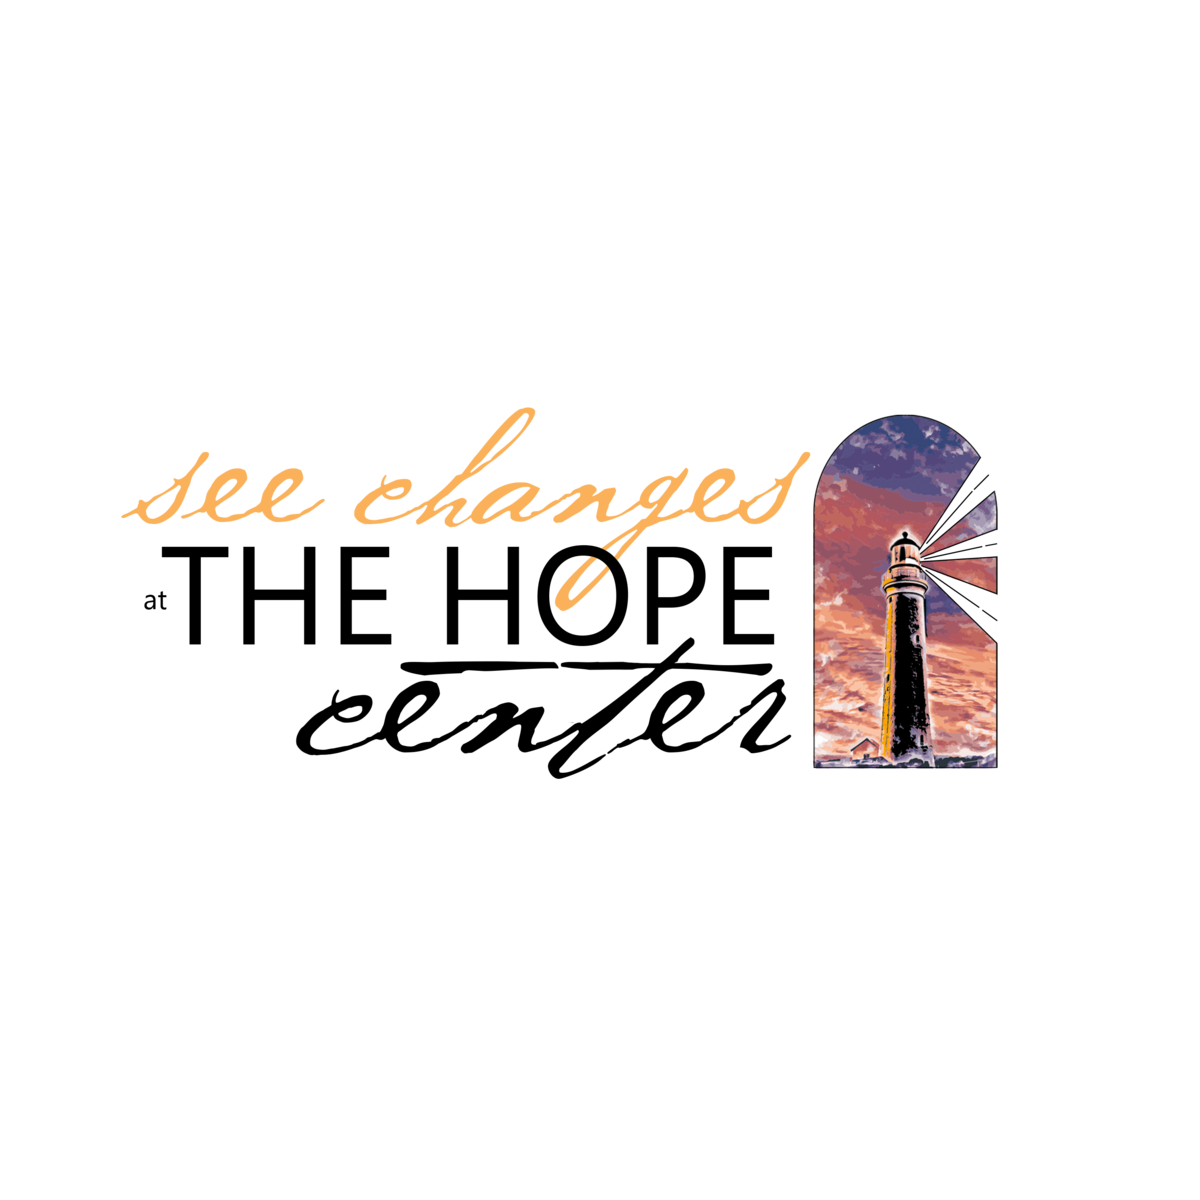 See Changes E png